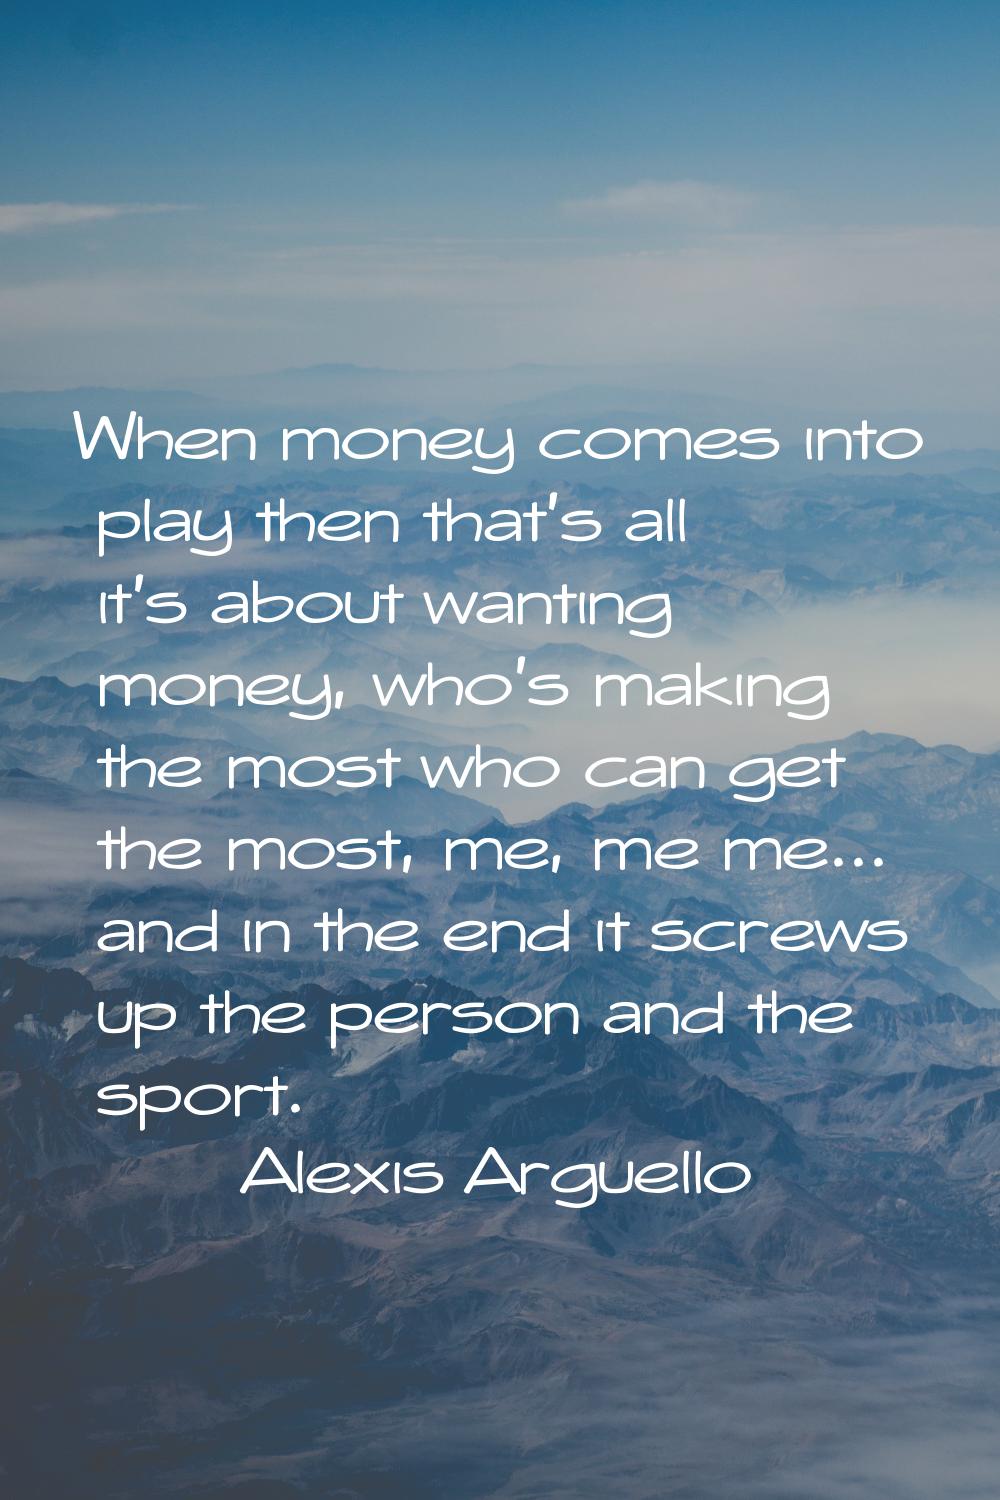 When money comes into play then that's all it's about wanting money, who's making the most who can 